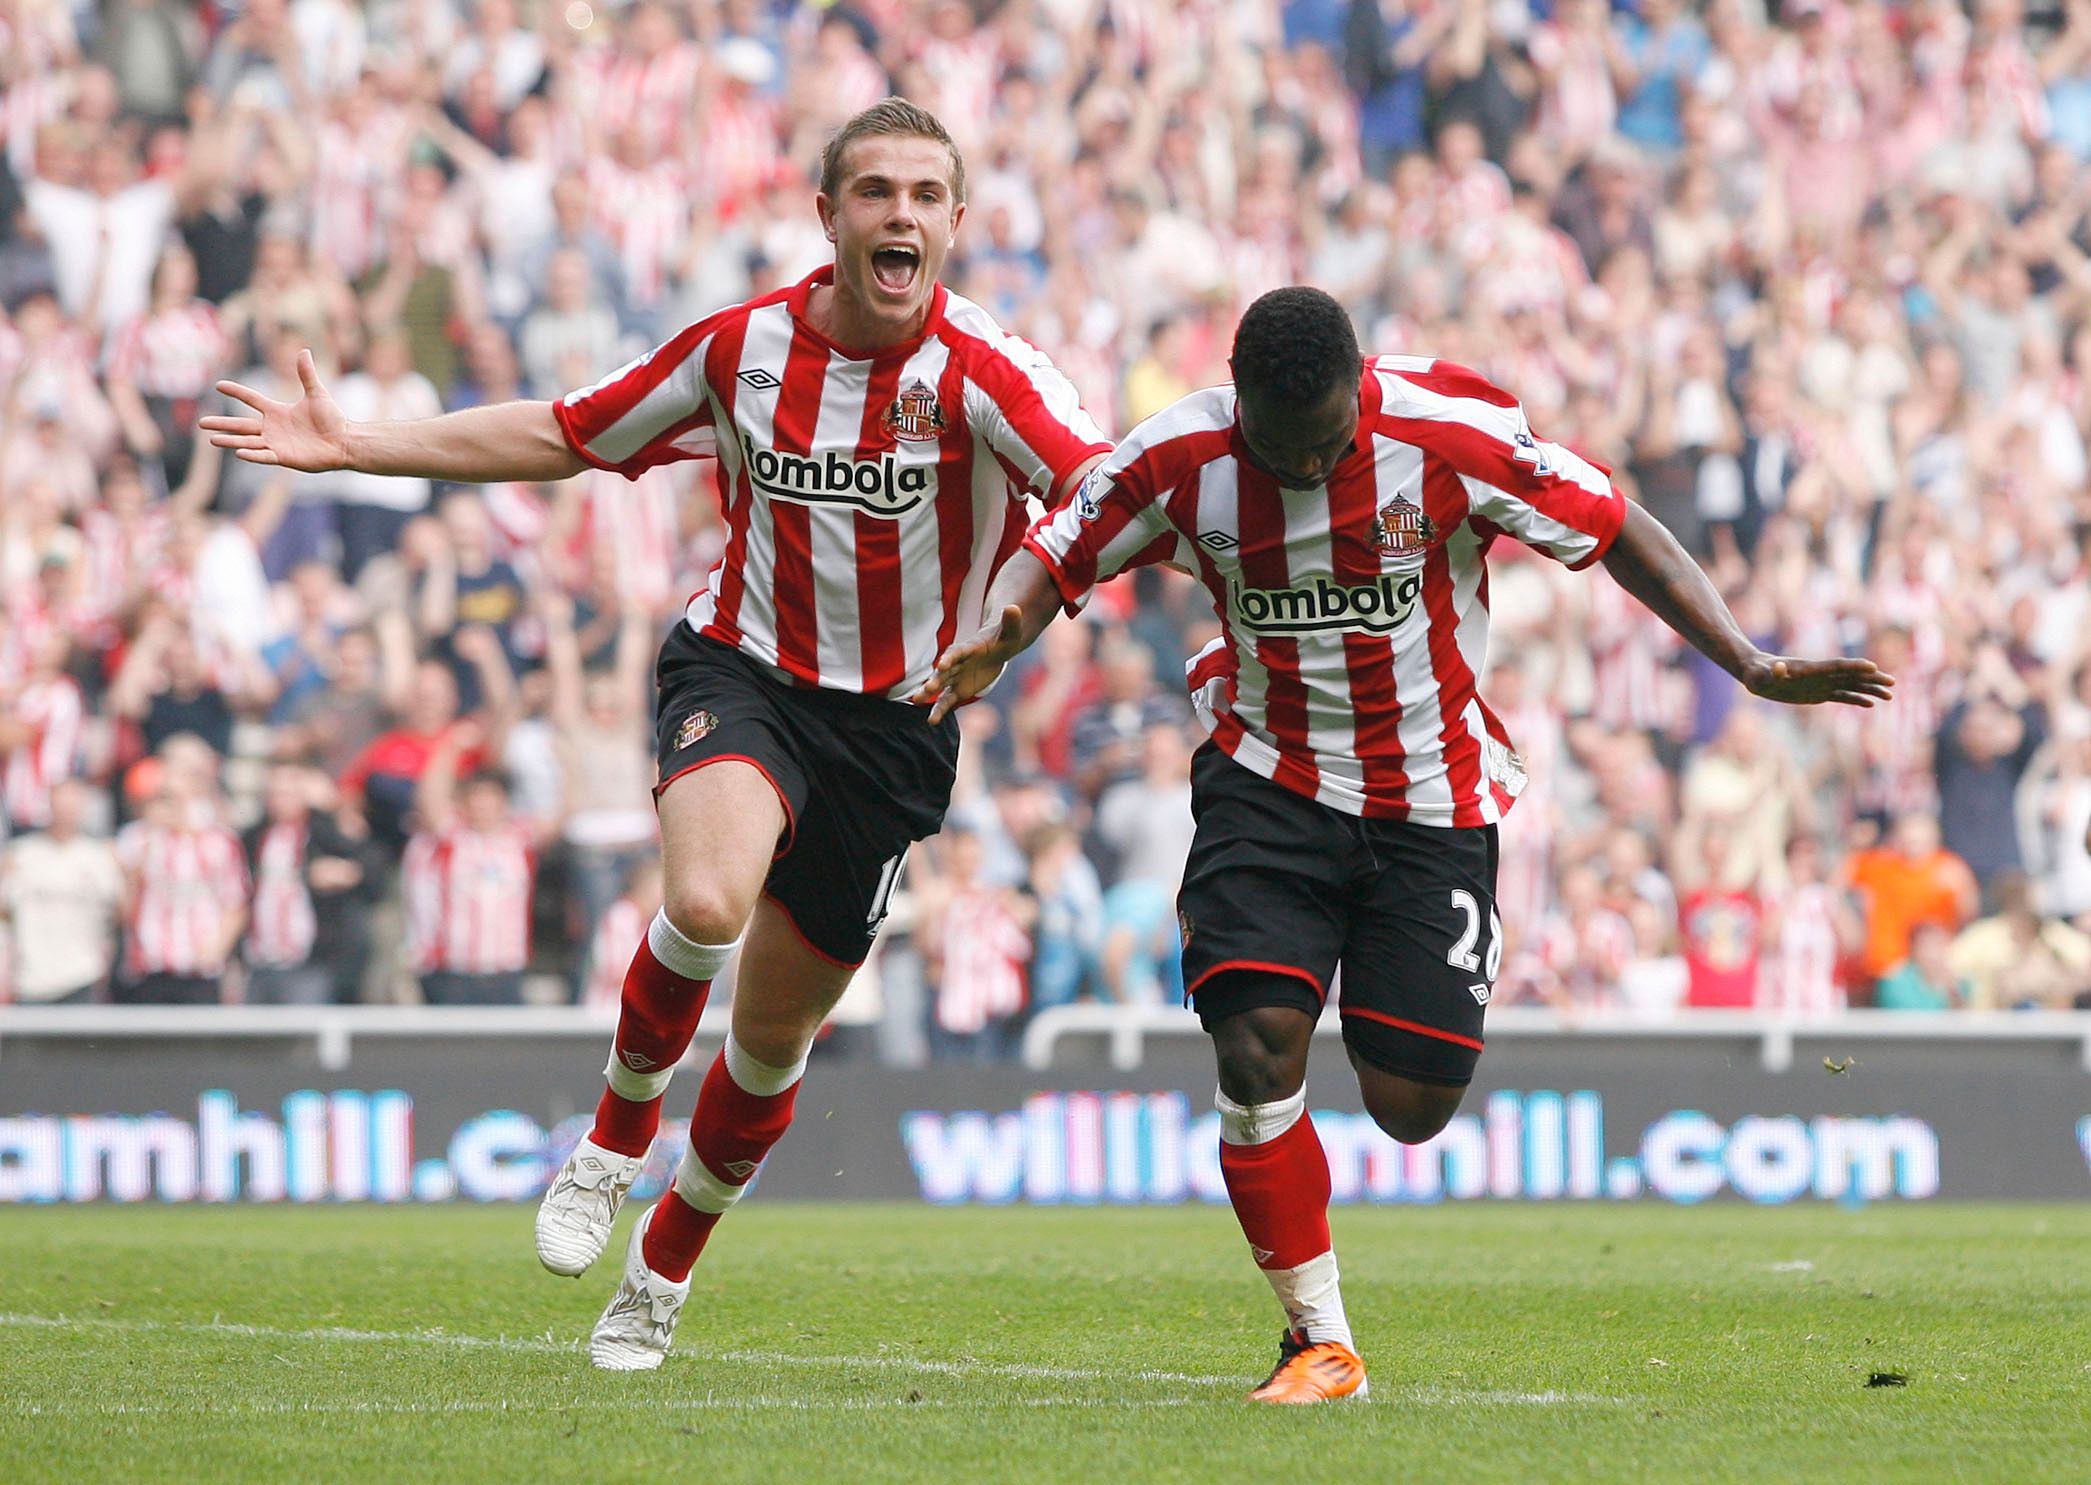 Football - Sunderland v Wigan Athletic Barclays Premier League - Stadium of Light - 10/11 - 23/4/11 
Stephane Sessegnon (R) celebrates with Jordan Henderson after scoring Sunderland's third goal from a penalty 
Mandatory Credit: Action Images / Ed Sykes 
Livepic 
NO ONLINE/INTERNET USE WITHOUT A LICENCE FROM THE FOOTBALL DATA CO LTD. FOR LICENCE ENQUIRIES PLEASE TELEPHONE +44 (0) 207 864 9000.